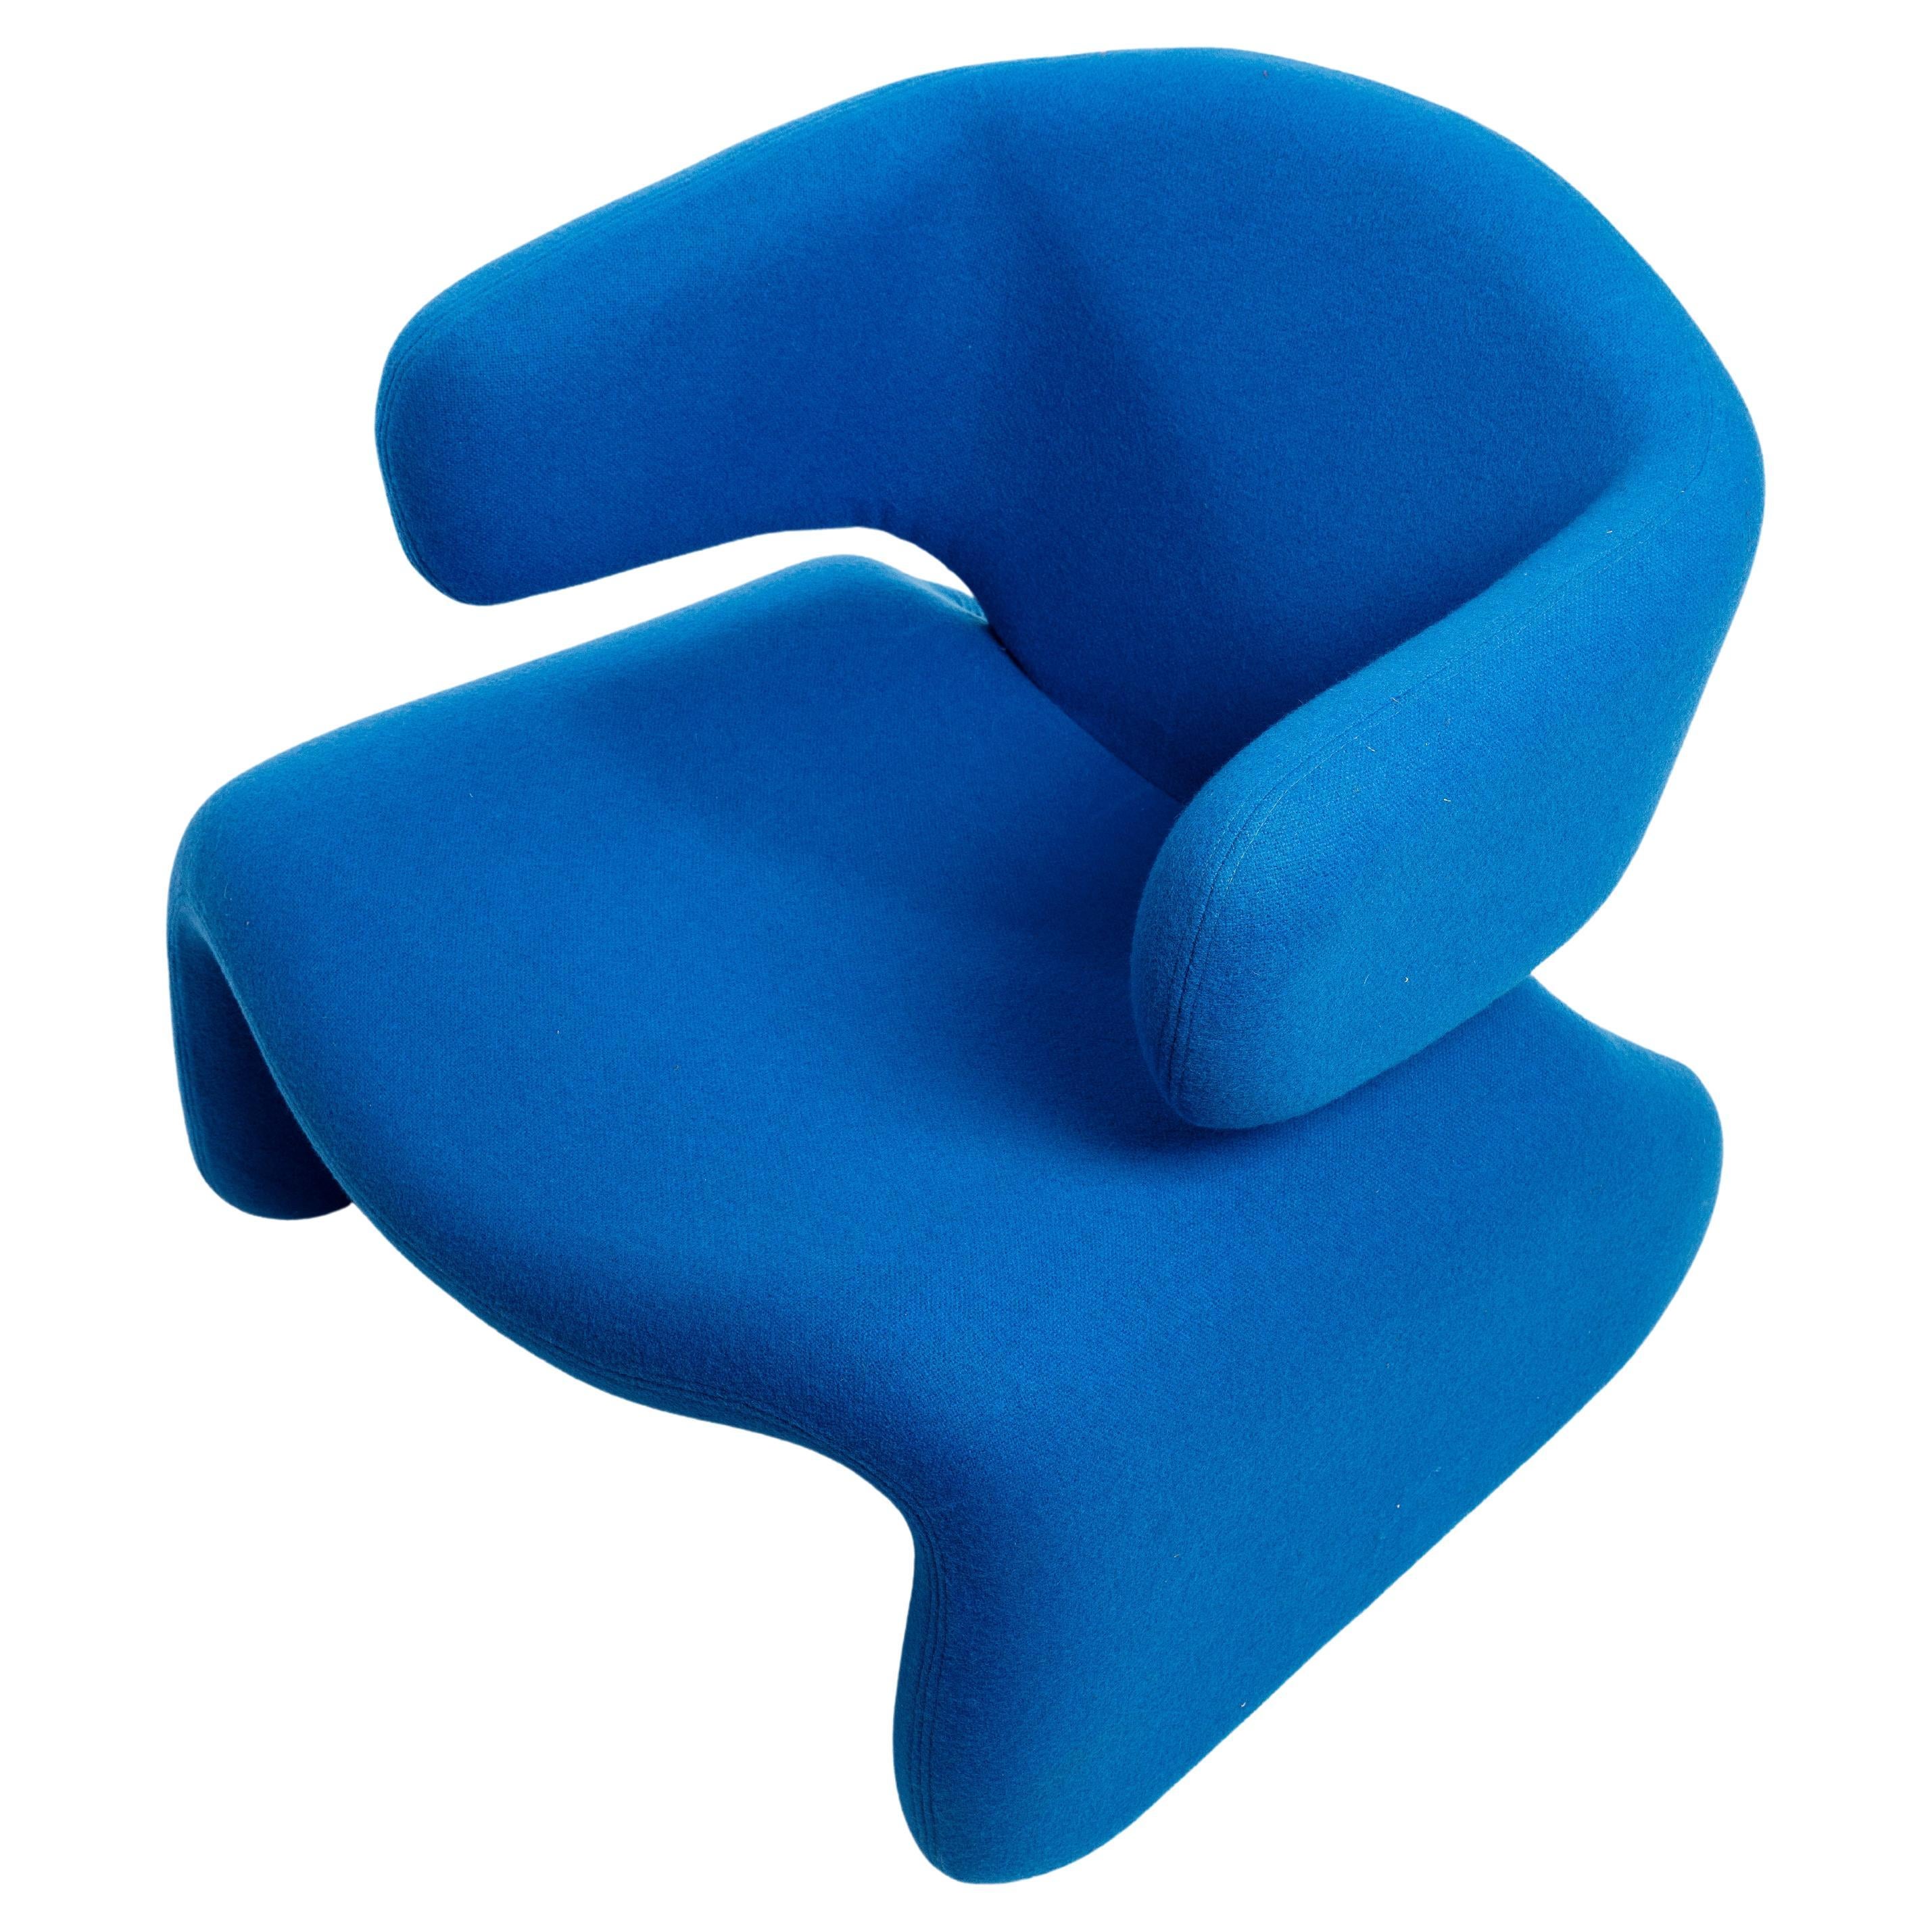 Olivier Mourgue Djinn Blue Armchair for Airborne 1960s New Kvadrat Fabric